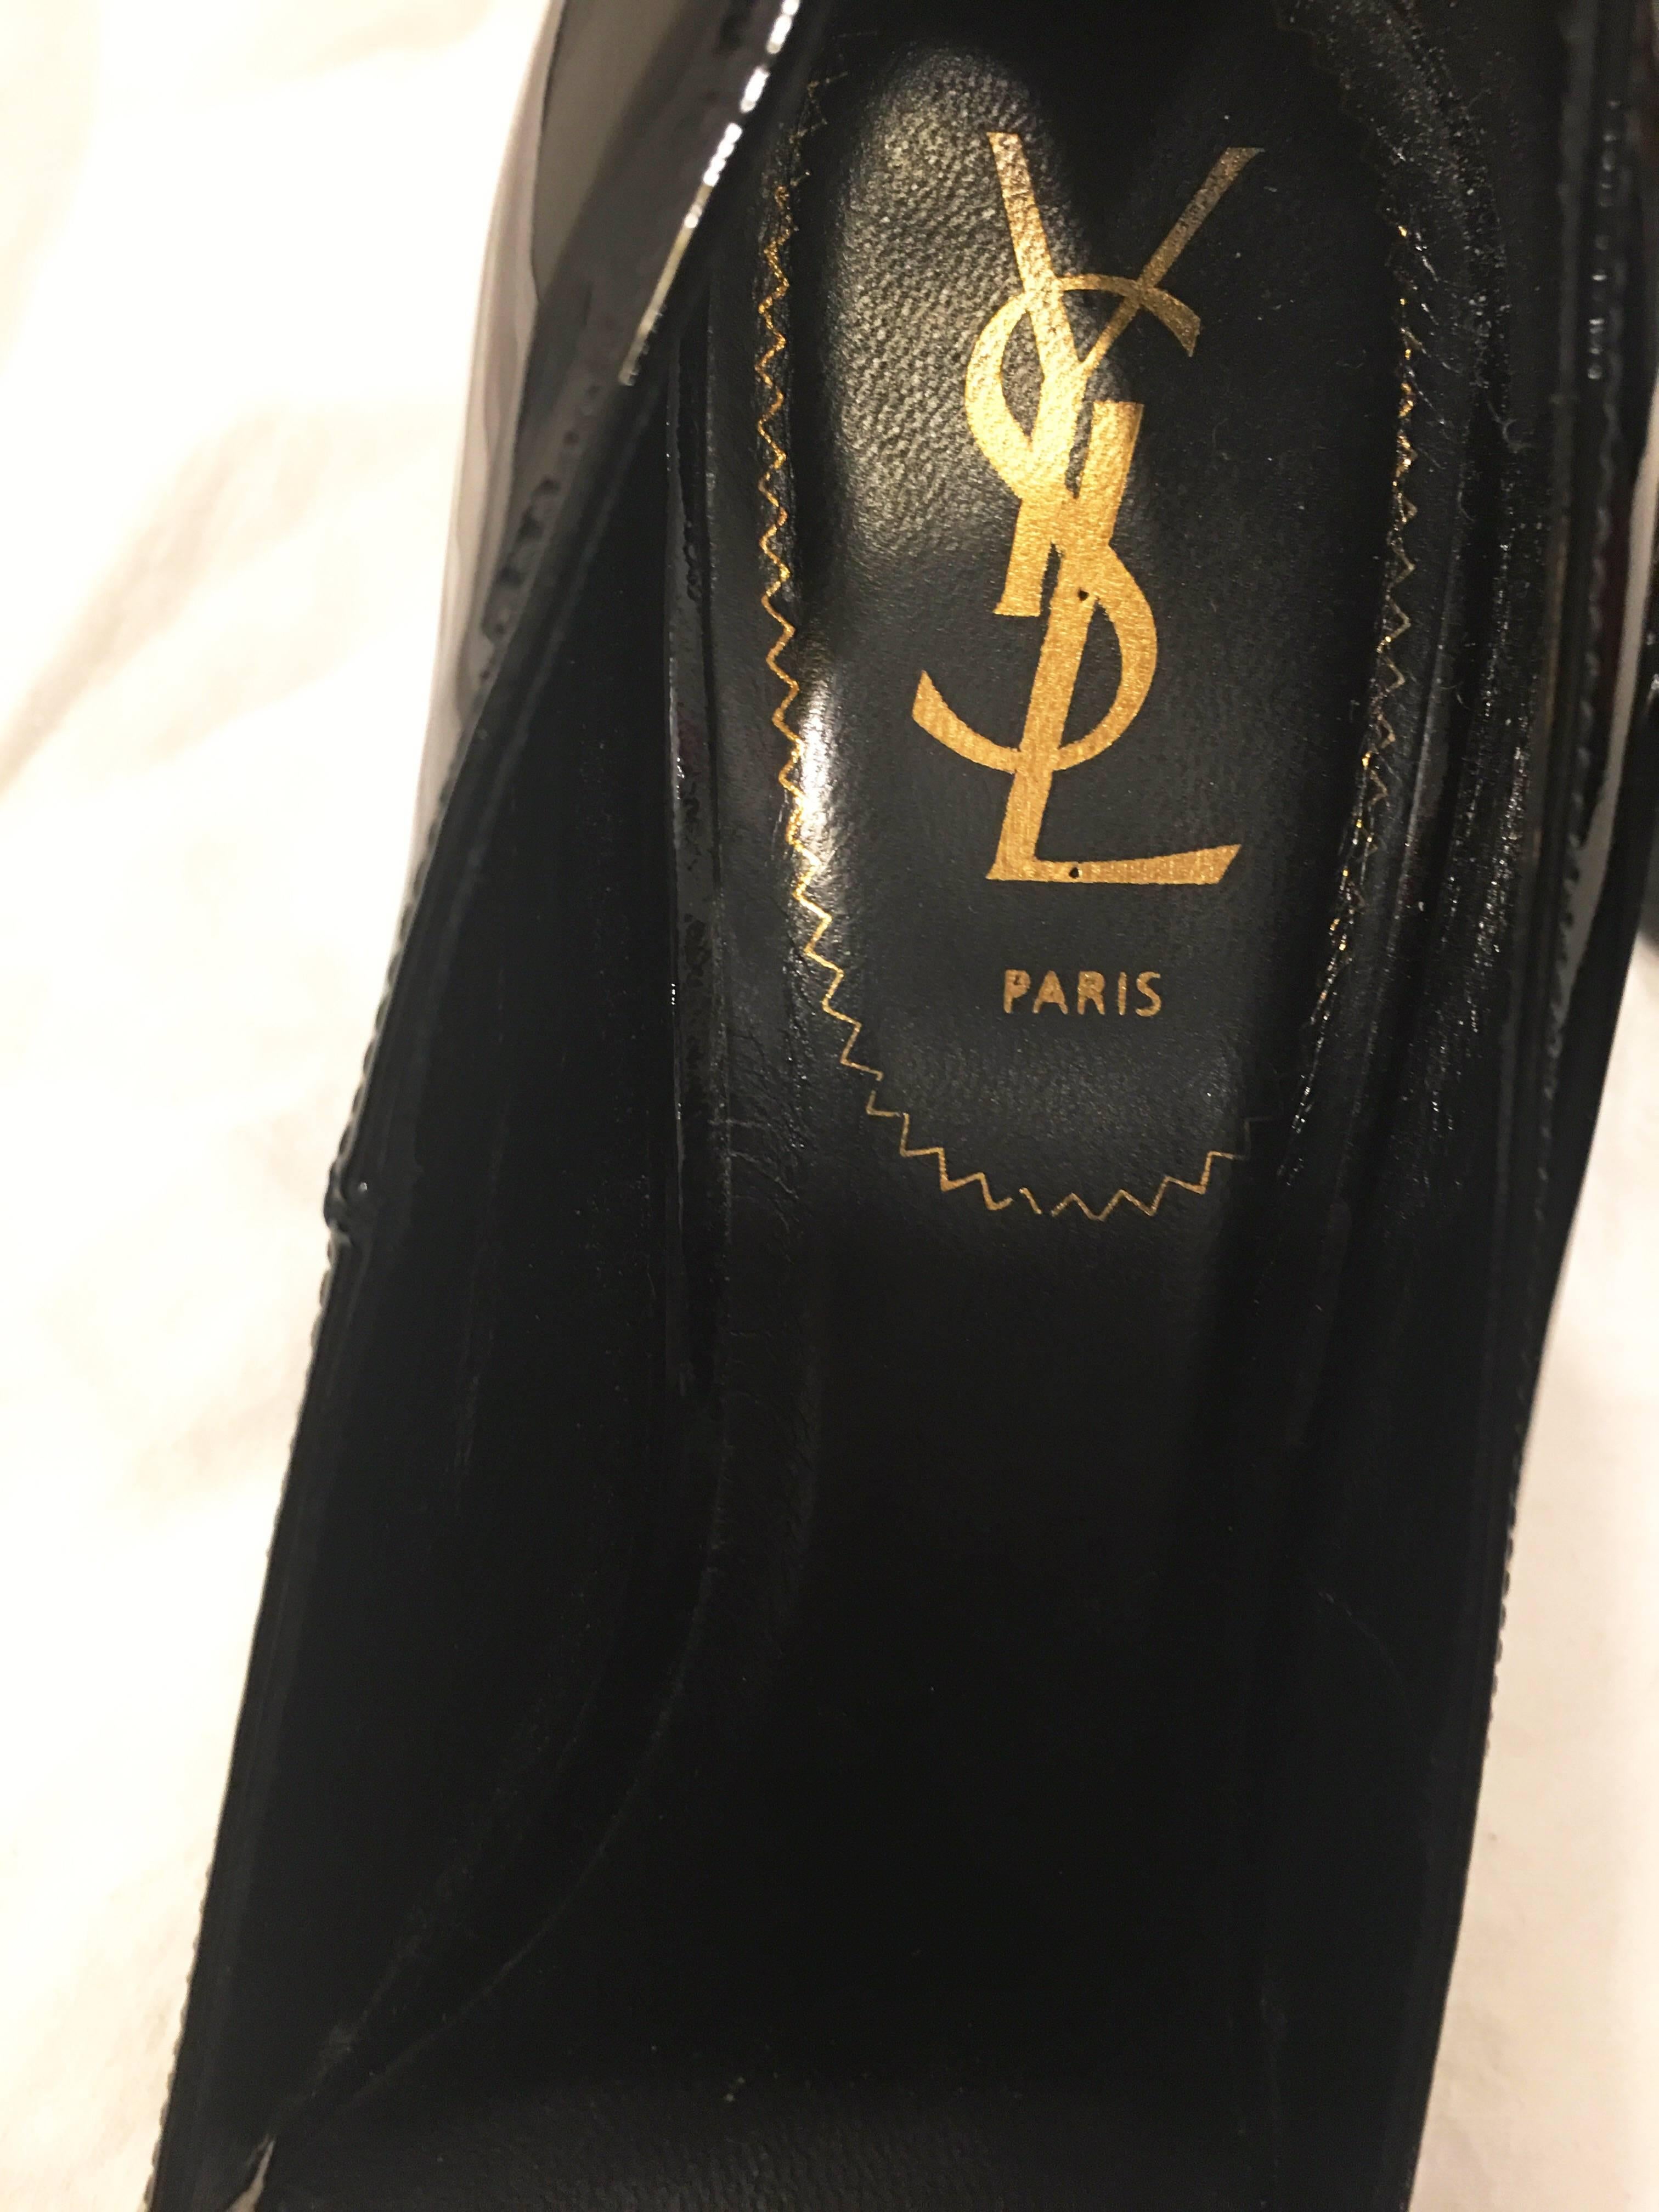 Yves St Laurent 5.5 inch Stiletto Heels Size 40 For Sale 2